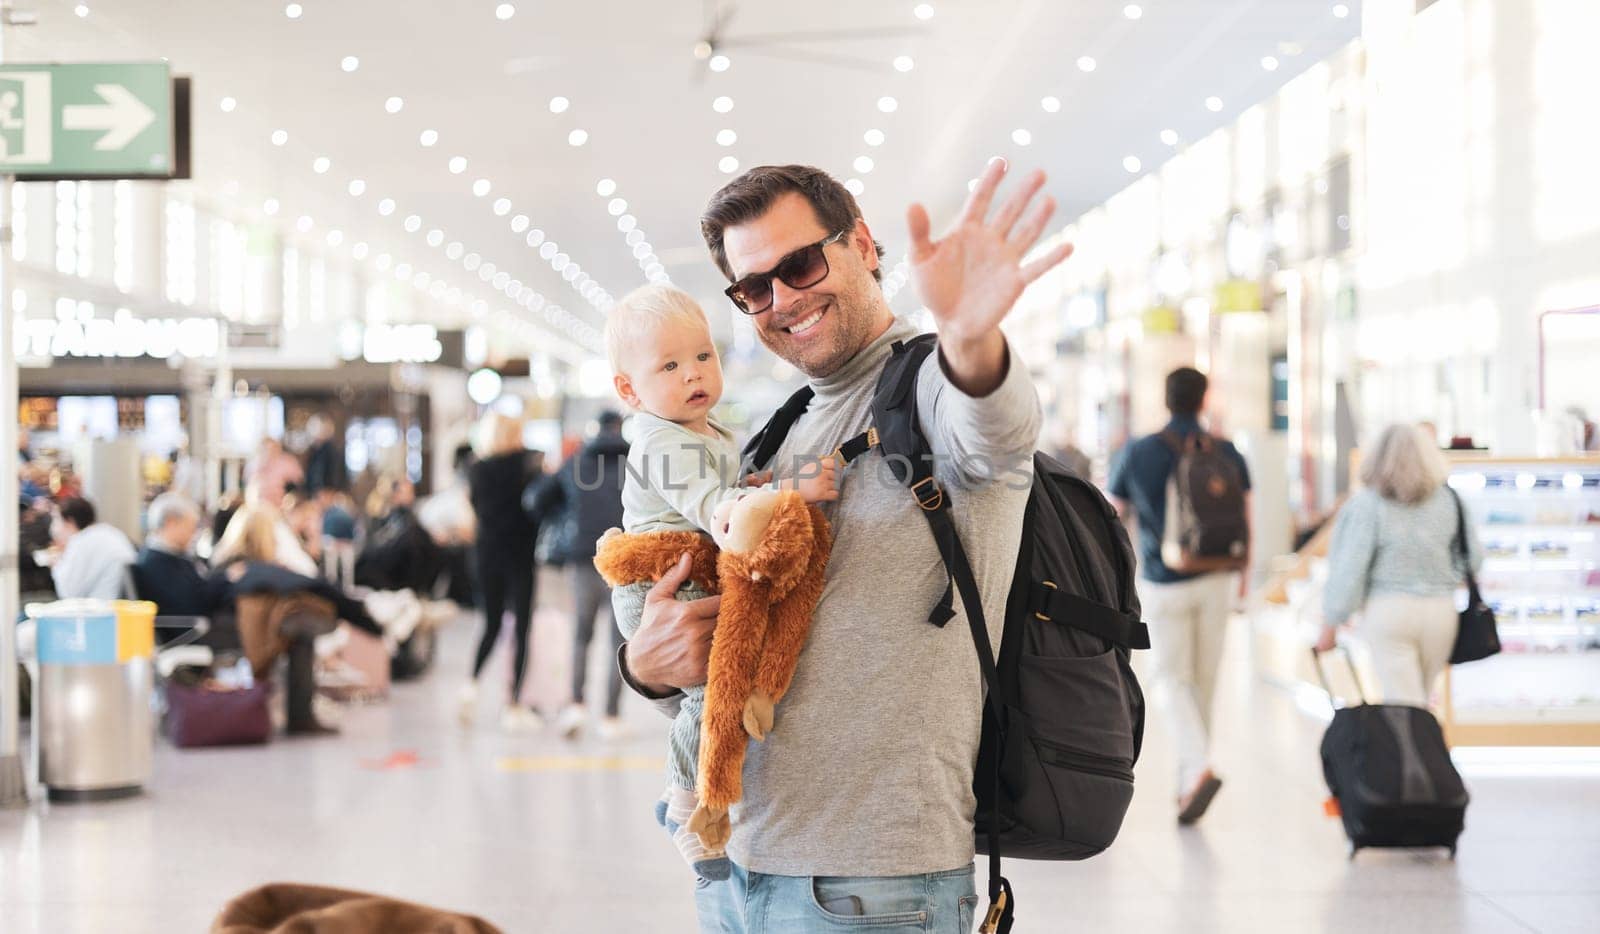 Father traveling with child, holding his infant baby boy at airport terminal waiting to board a plane waving goodby. Travel with kids concept. by kasto